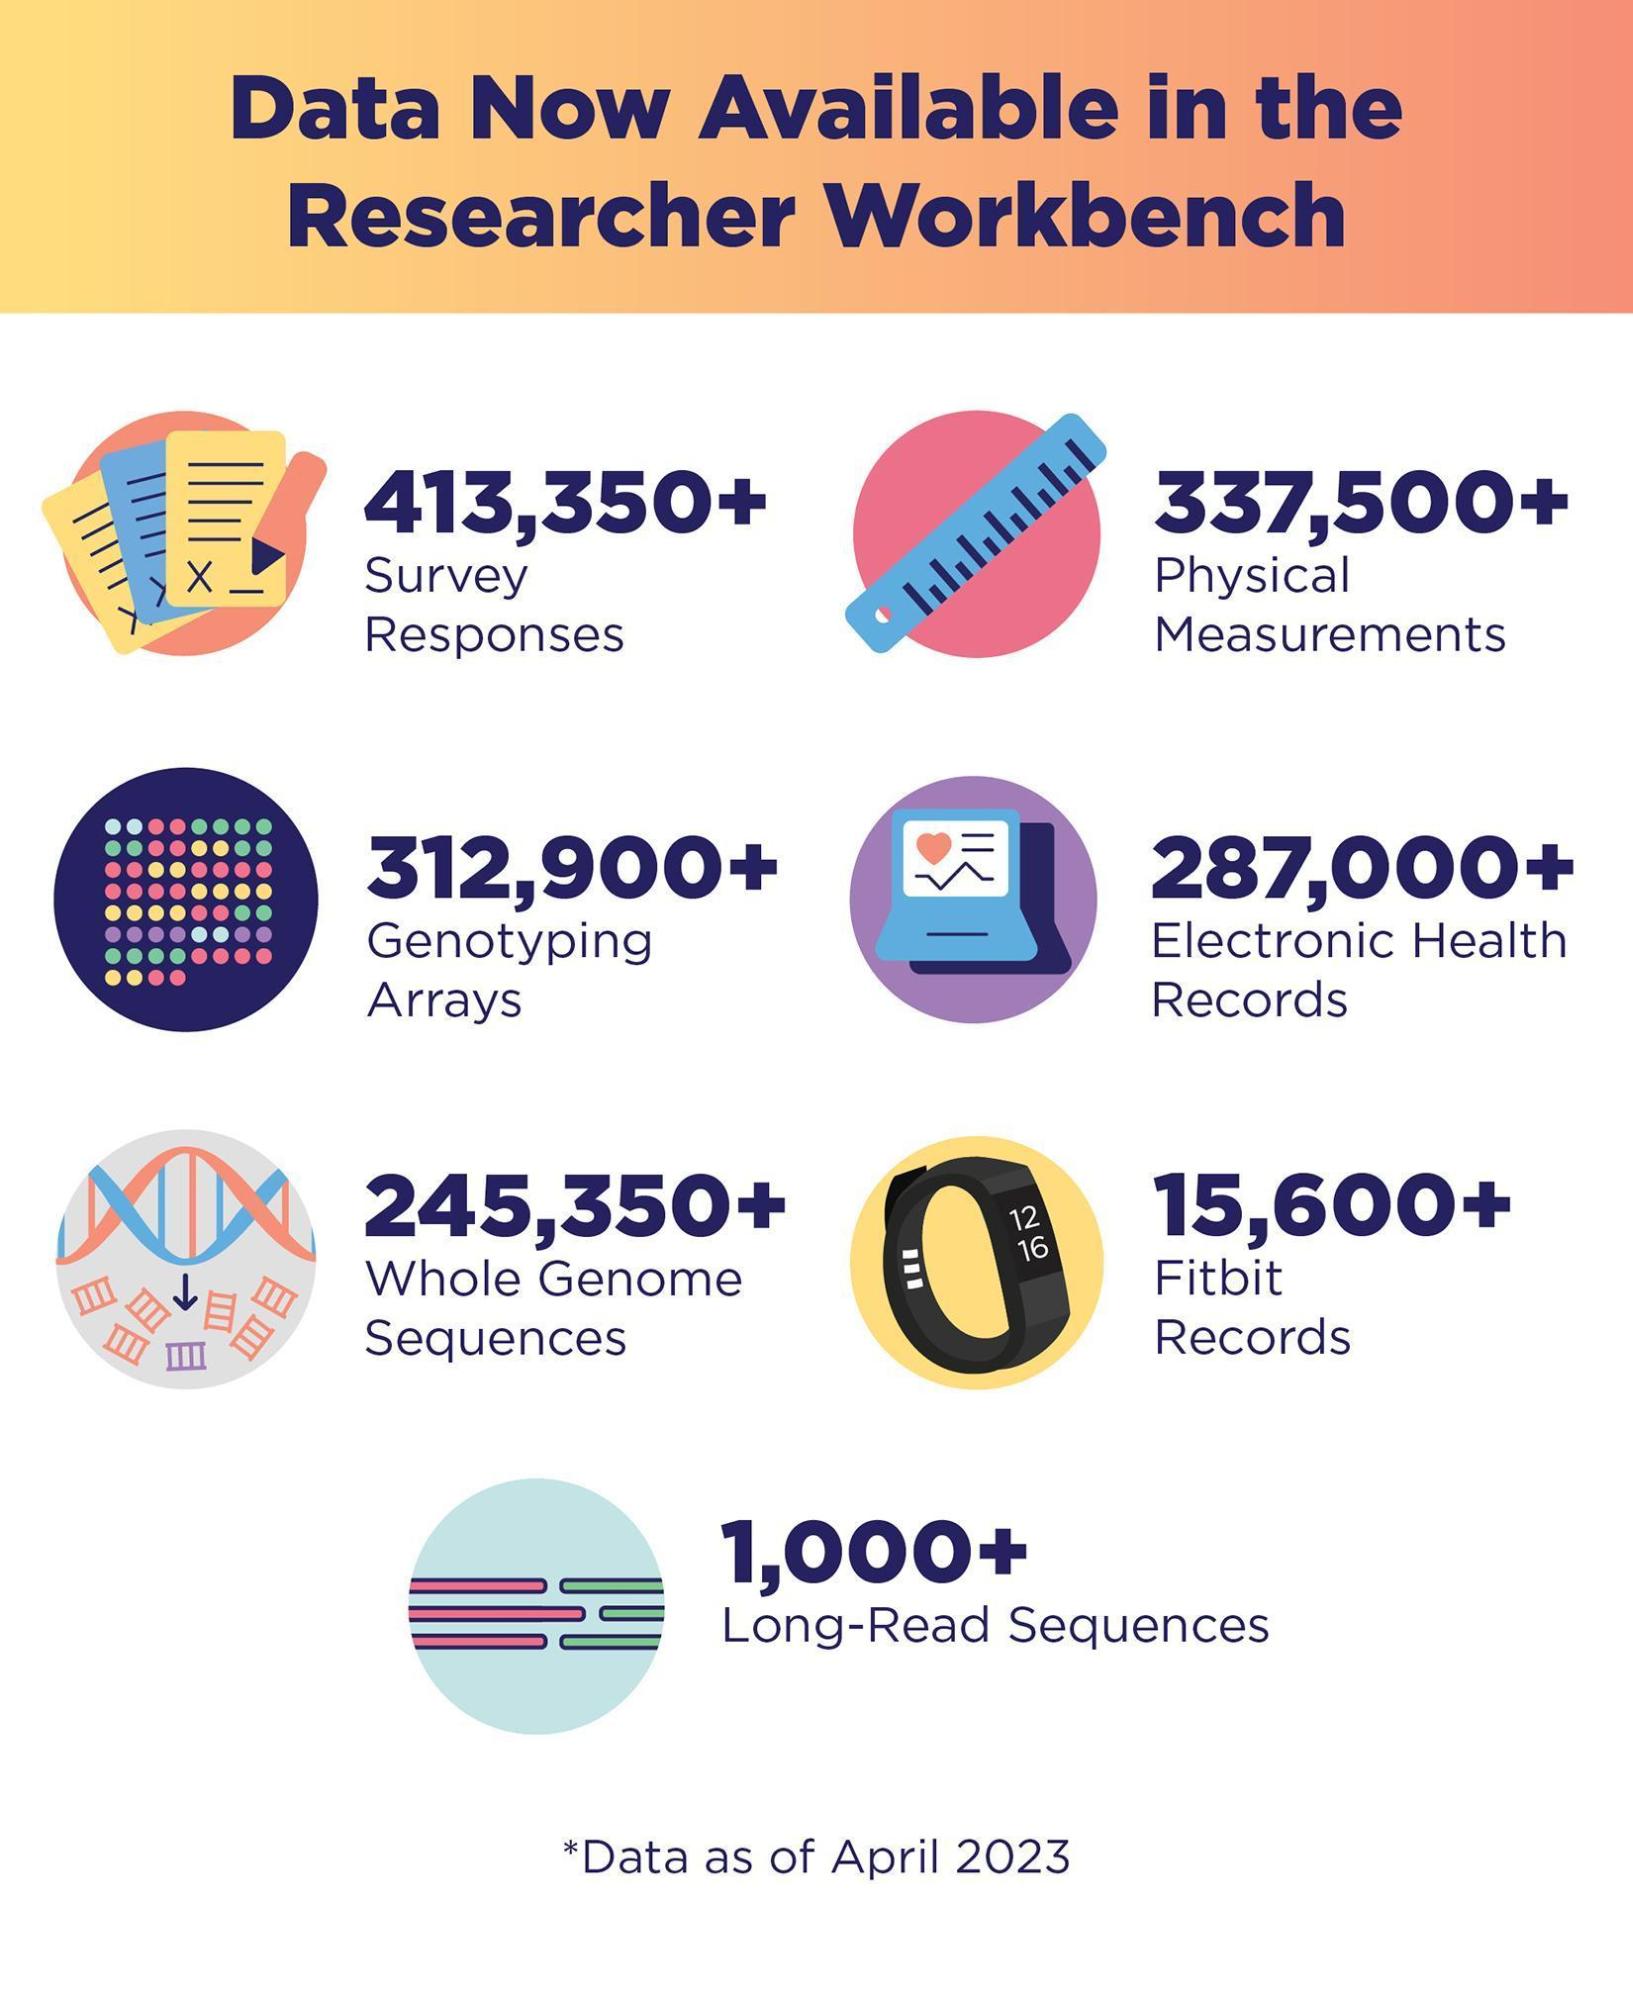 This is an infographic that shows the type and volume of All of Us participant data available for research. This includes more than 413,350 survey responses, more than 337,500 physical measurements, more than 312,900 genotyping arrays, more than 287,000 electronic health records, more than 245,350 whole genome sequences, more than 15,600 Fitbit records, and more than 1,000 long-read genome sequences. Data as of April 2023.